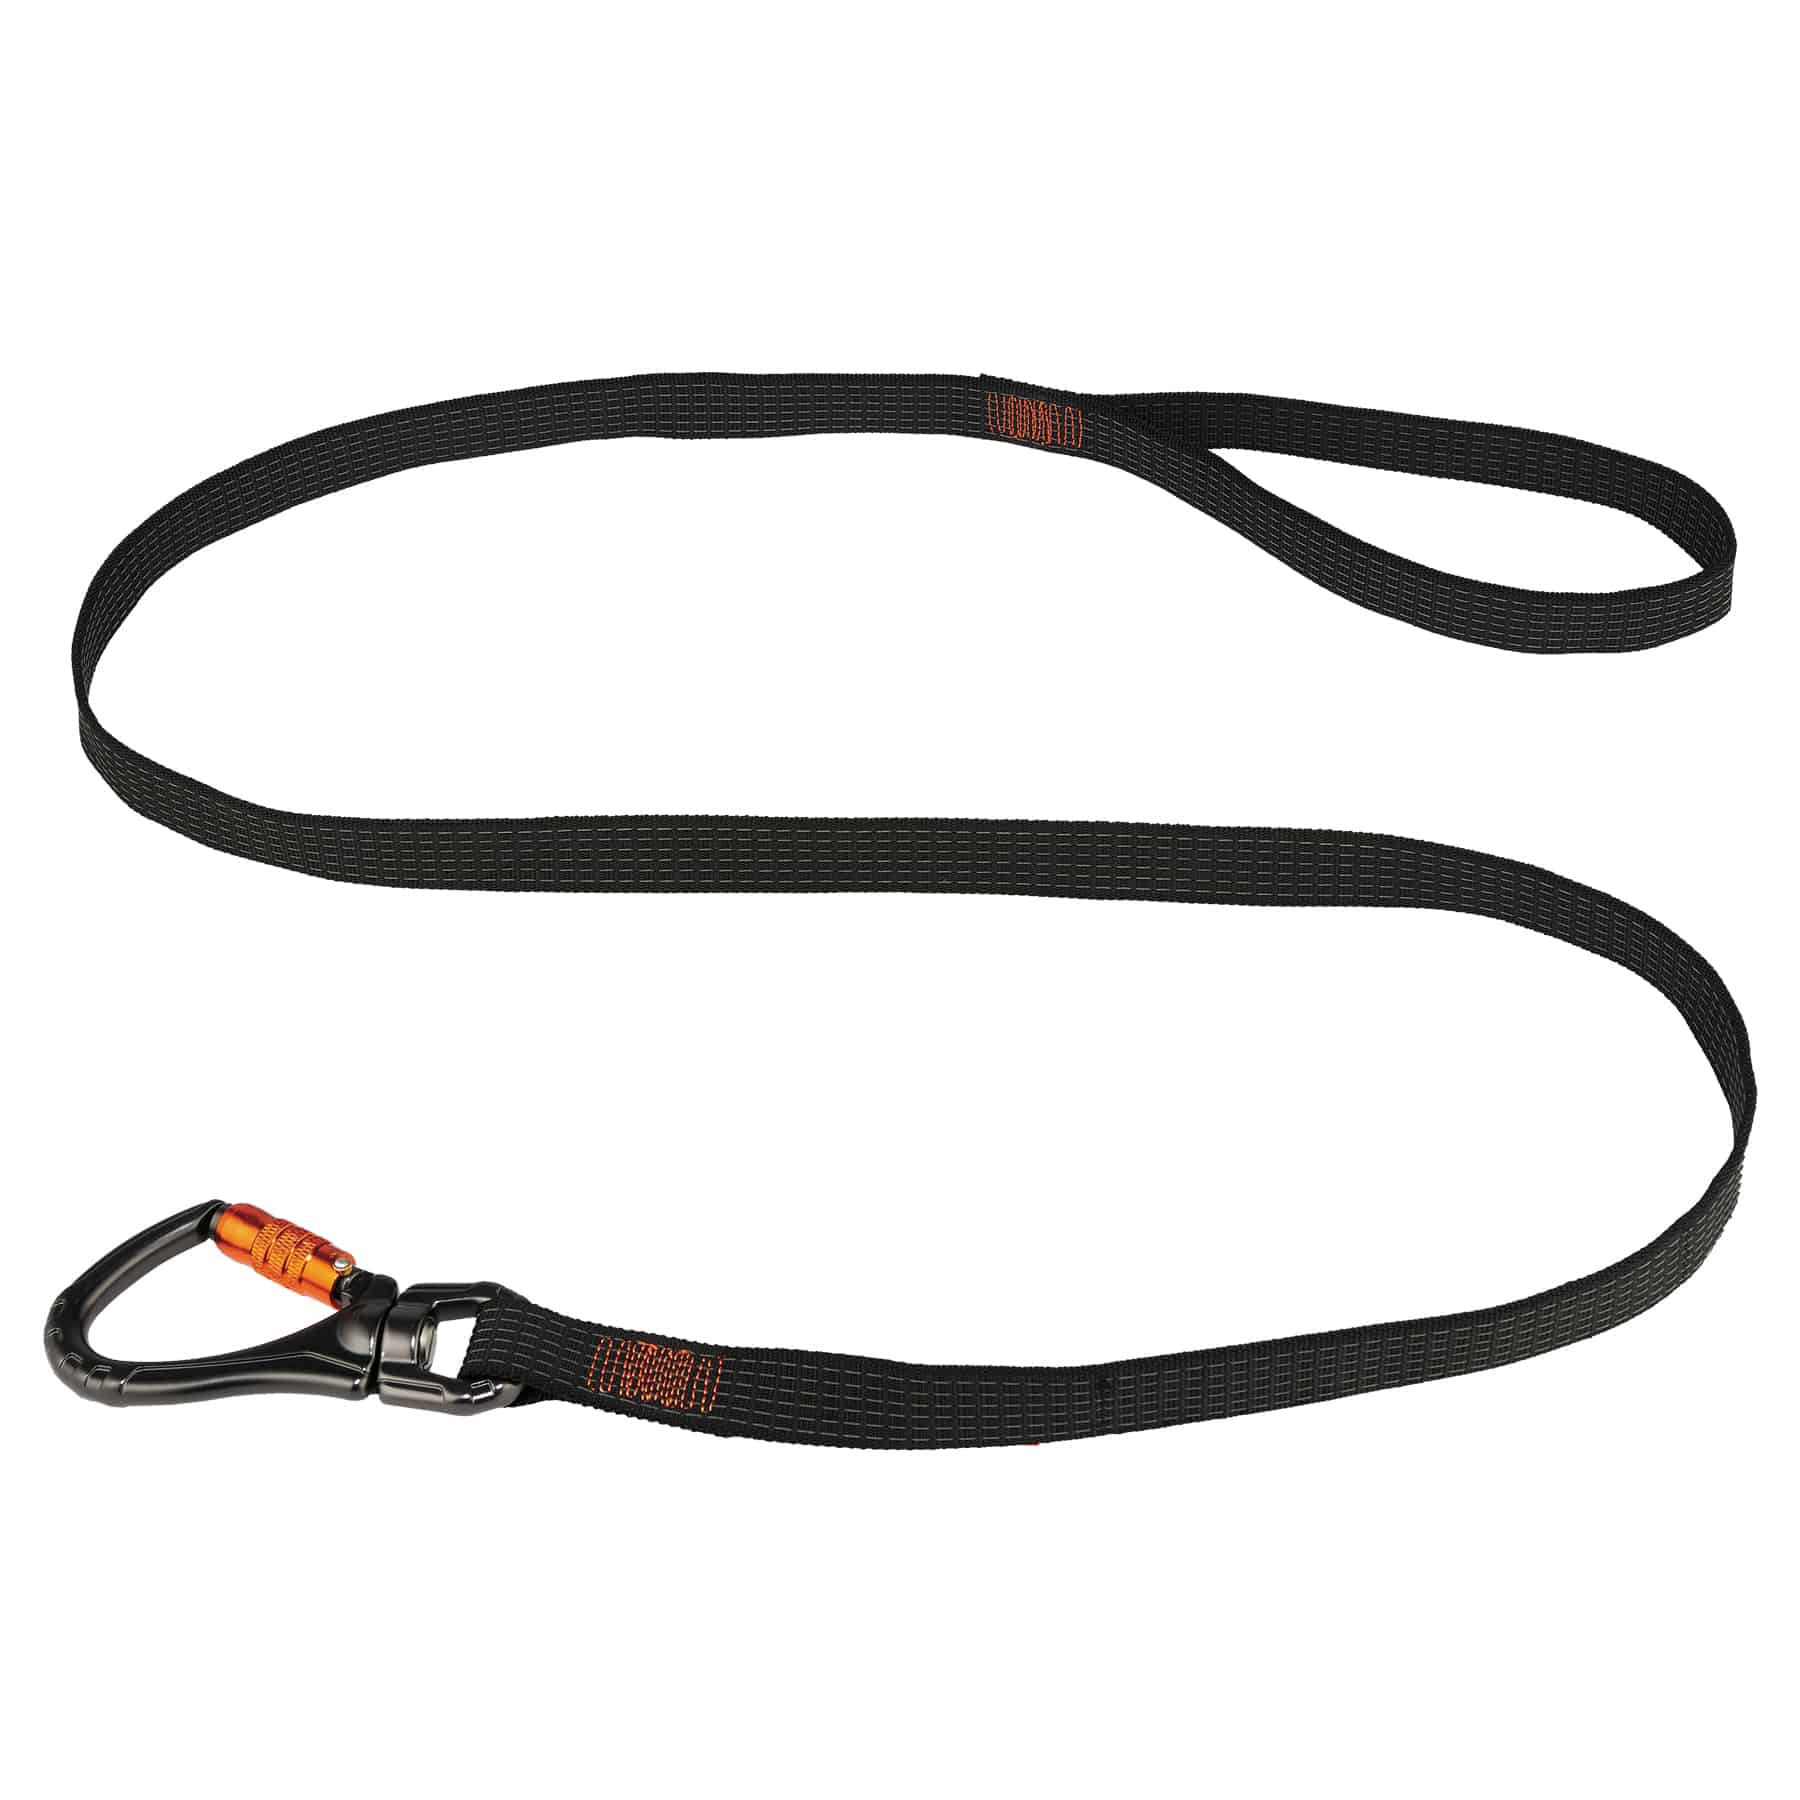 Bungee Cord With Carabiner Lanyard String Safety Tool Leash Camera Lanyard  Cord